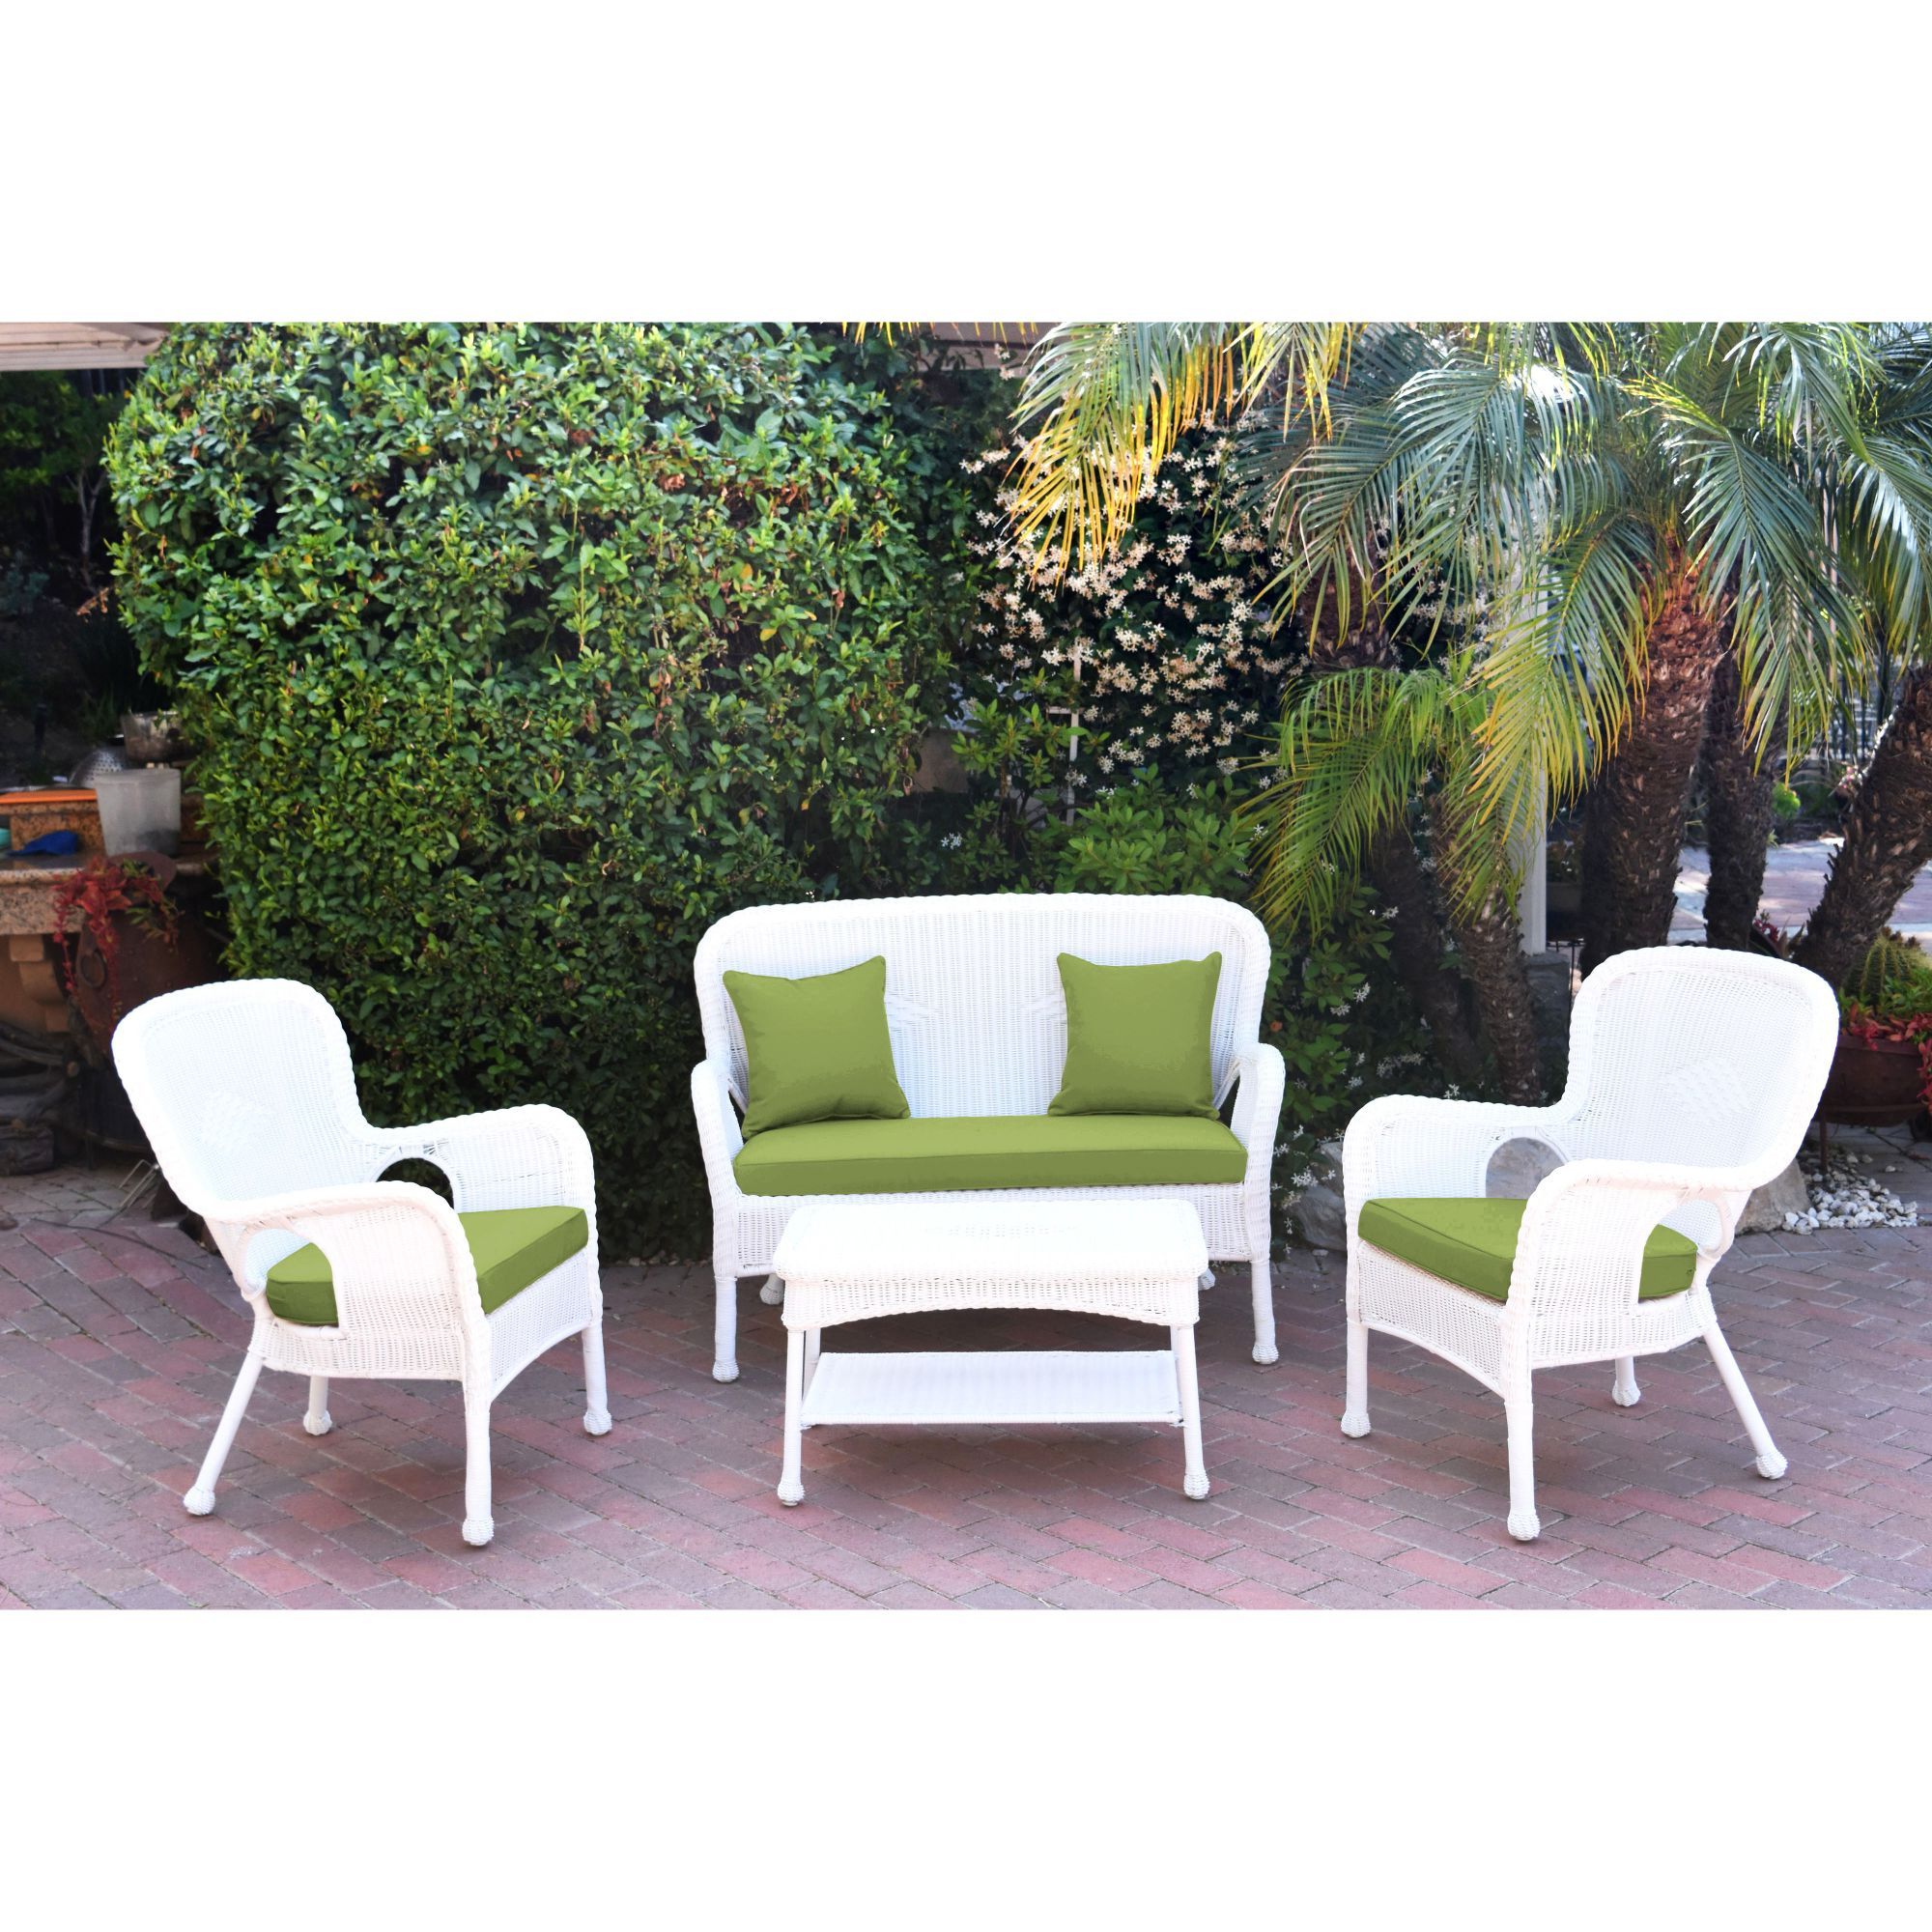 4 Piece White Wicker Outdoor Furniture Patio Conversation Set – Sage In Famous 4 Piece Wicker Outdoor Seating Sets (View 2 of 15)